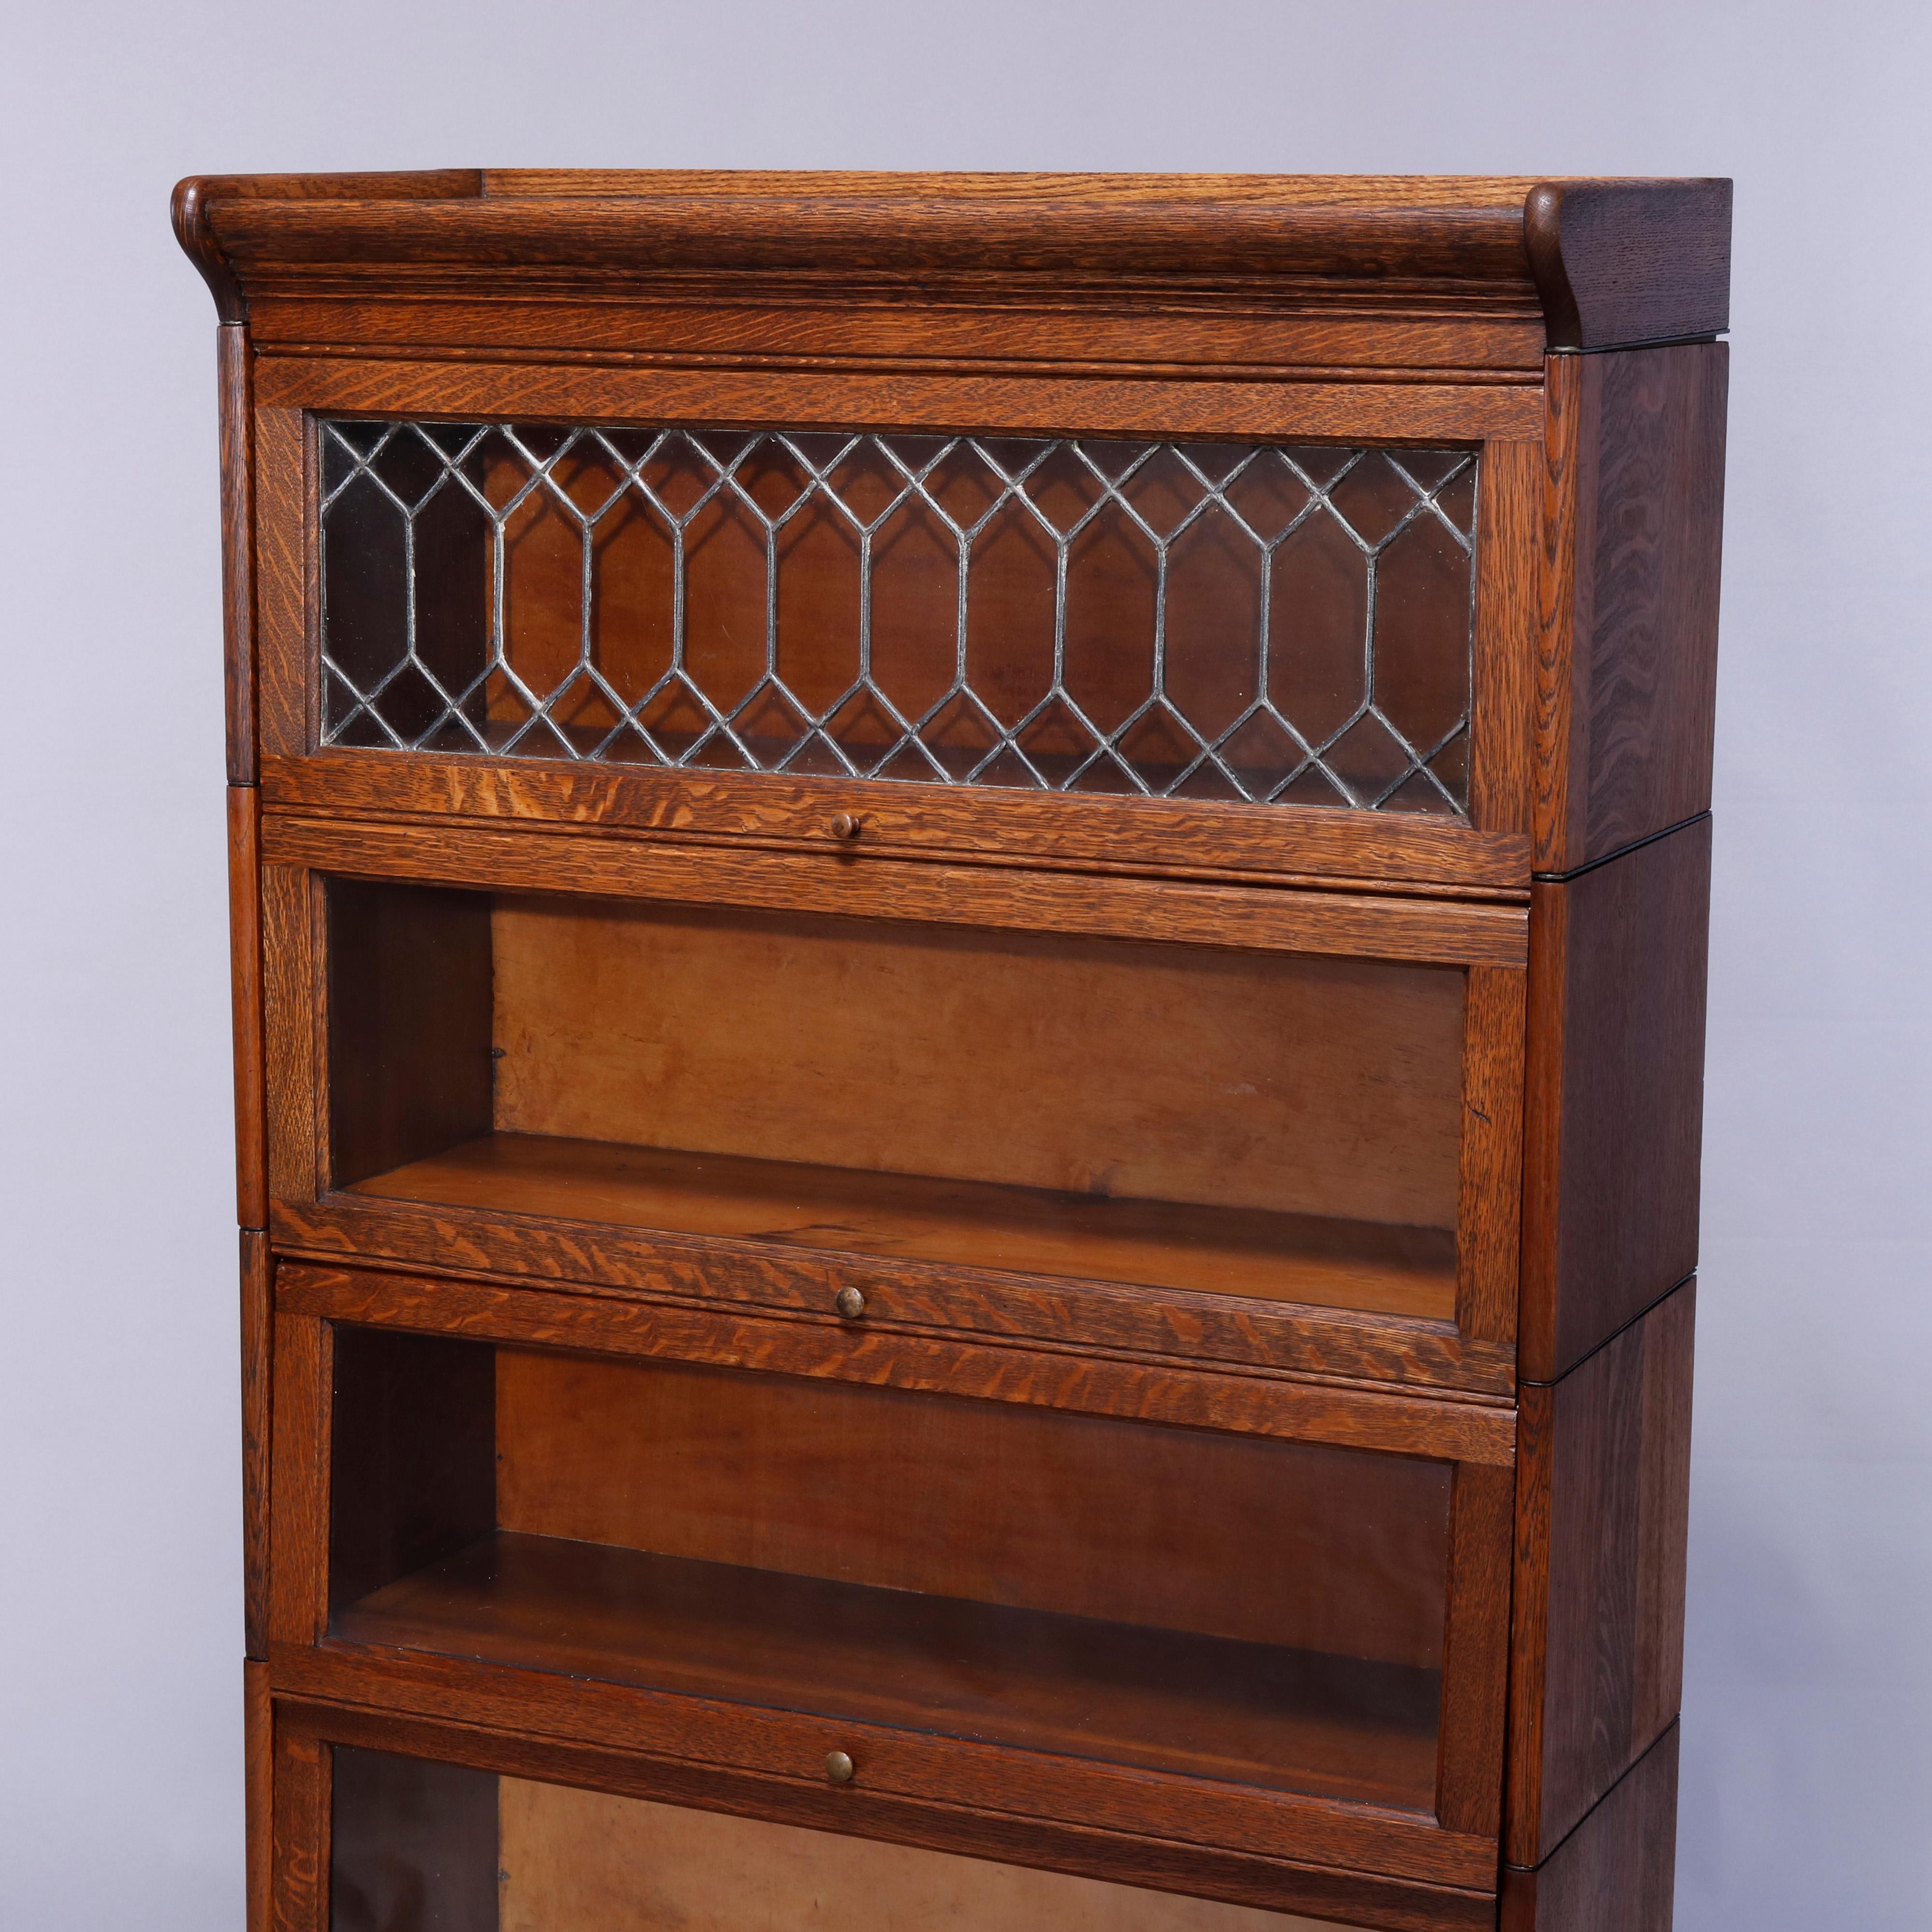 An antique Arts and Crafts Mission barrister bookcase by Gunn offers quarter sawn oak construction with four stacks, one with leaded glass and three having pull out glass doors, raised on ogee base, label remnant as photographed, c1910

Measures: